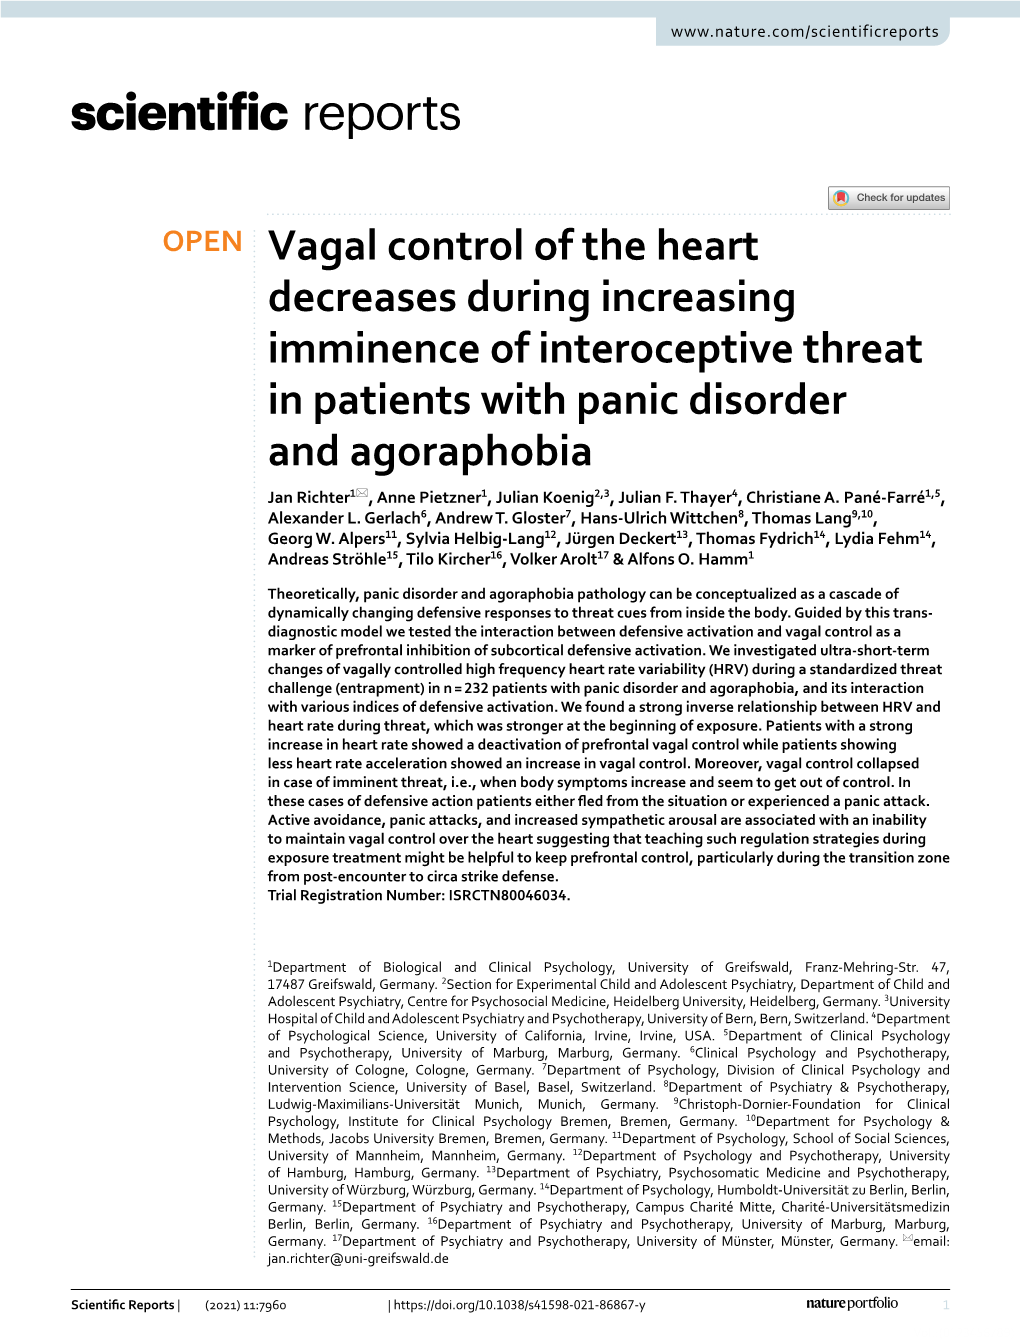 Vagal Control of the Heart Decreases During Increasing Imminence Of